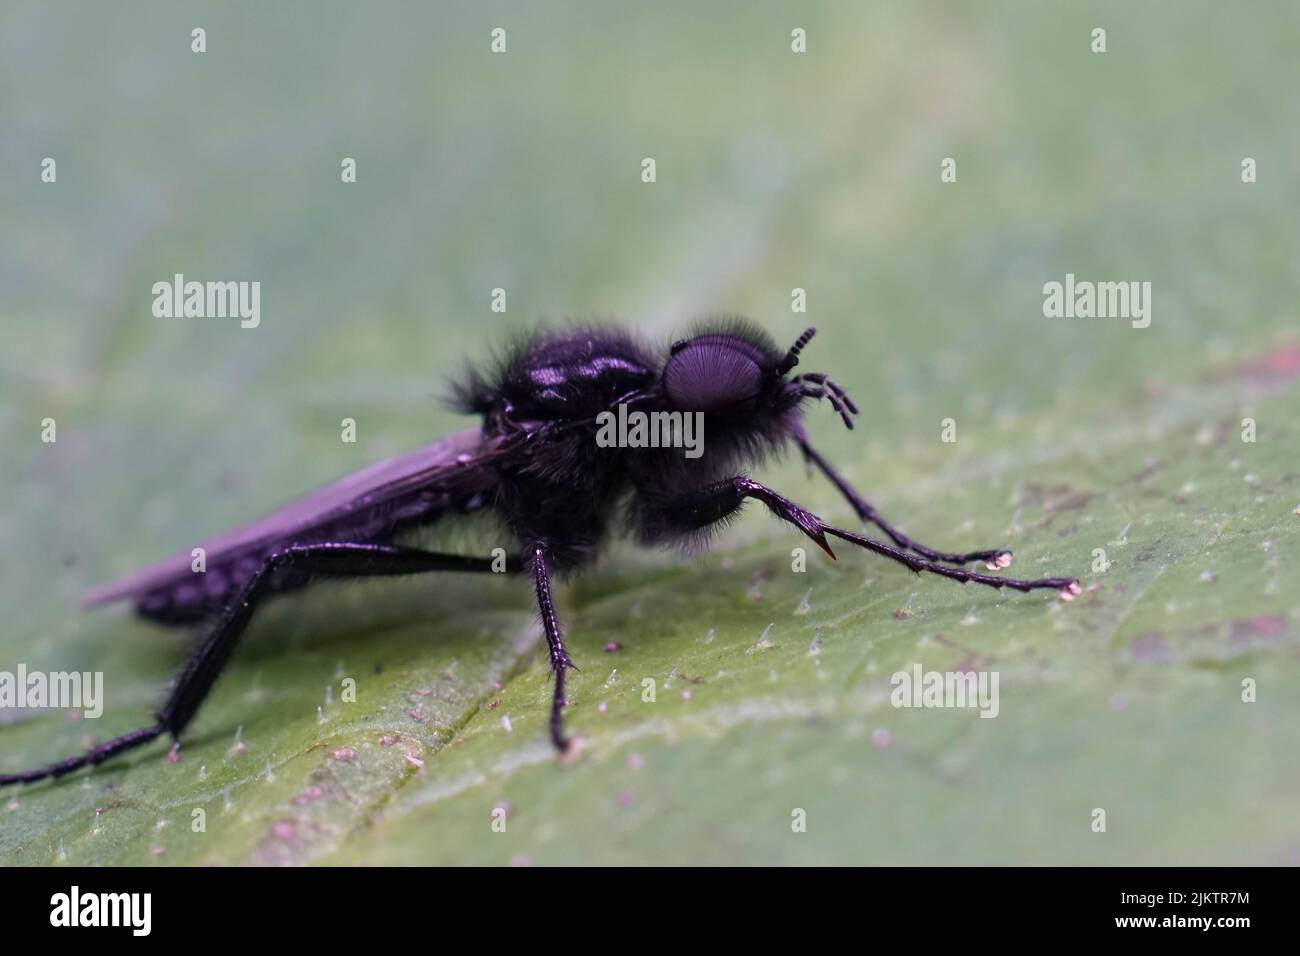 Closeup on a black an hairy St. Mark's or hawthorn fly, Bibio marci, sitting on a green leaf in the field Stock Photo